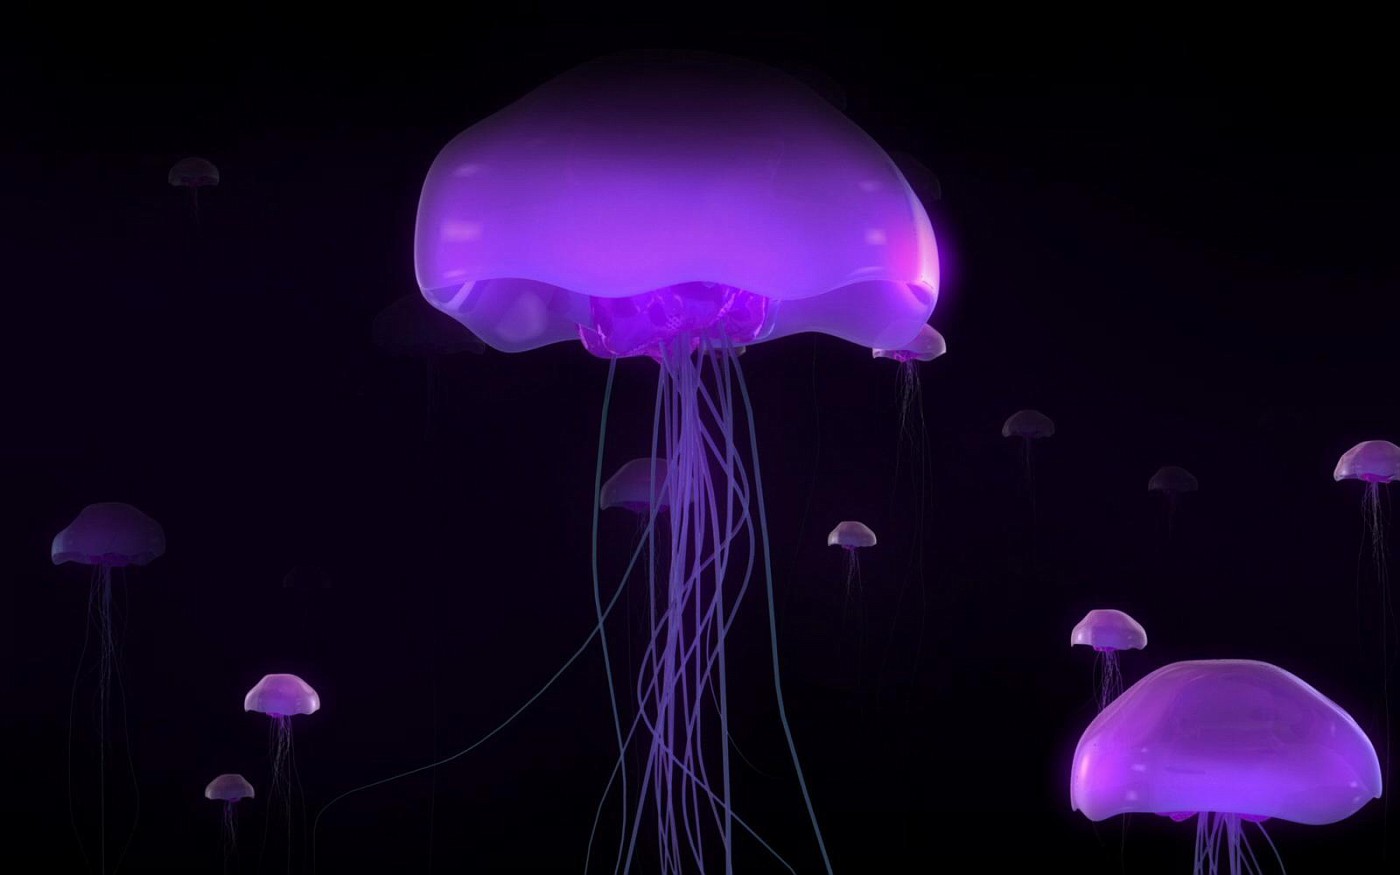 3d Abstract Fair 3d Abstract Hd Fresh Picture Jelly - High Resolution Jellyfish - HD Wallpaper 